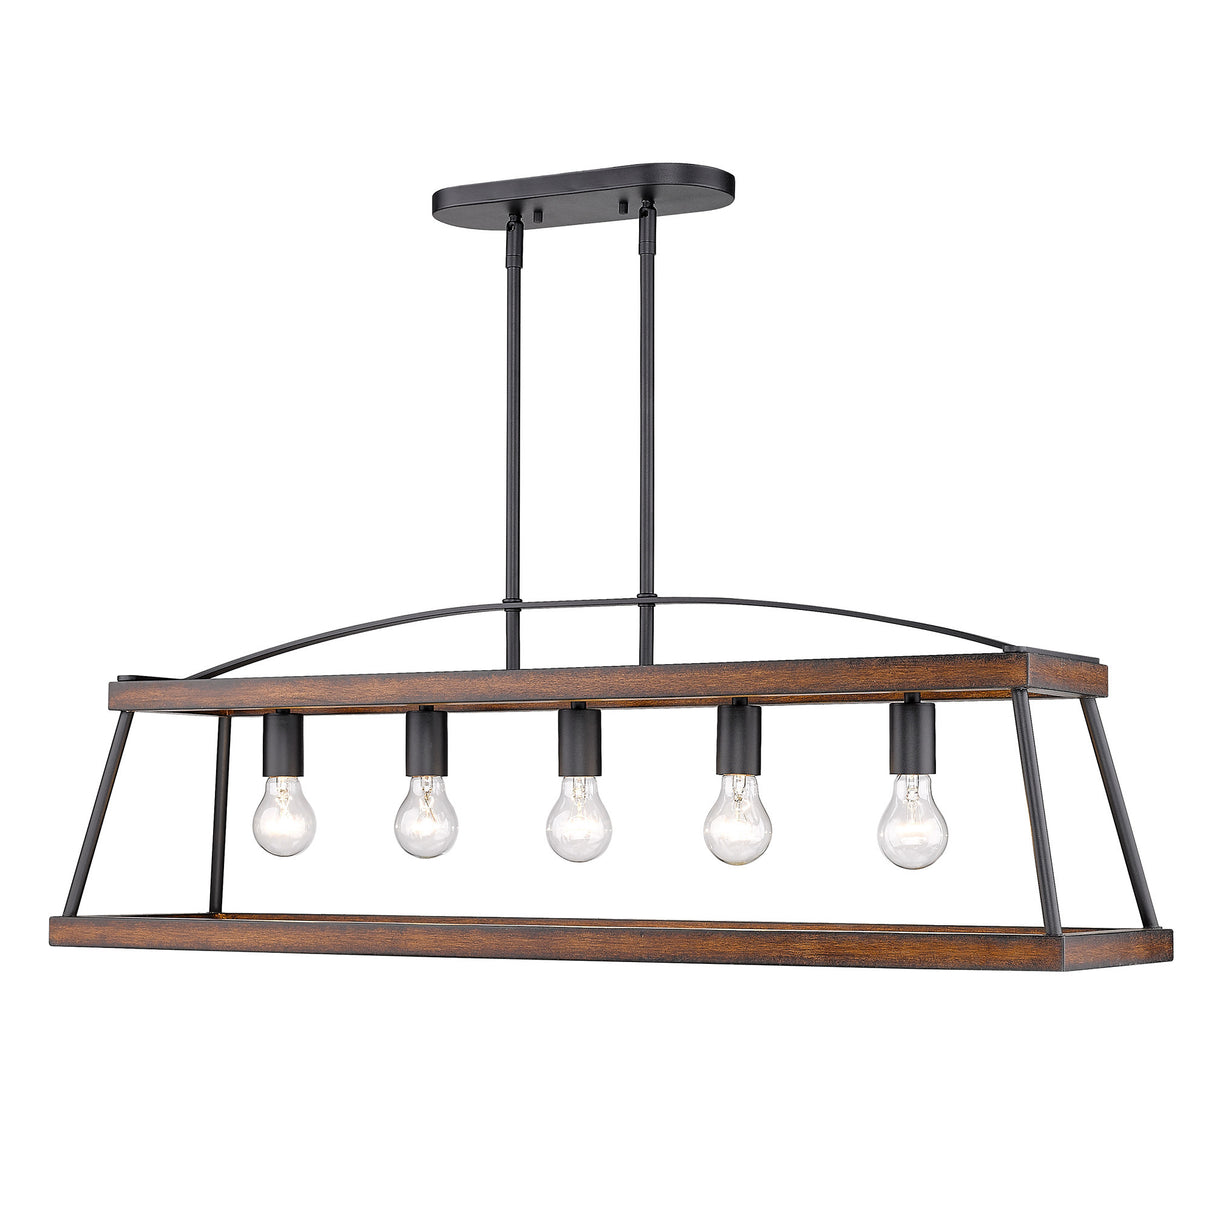 Teagan Linear Pendant in Natural Black with Rustic Oak Accents